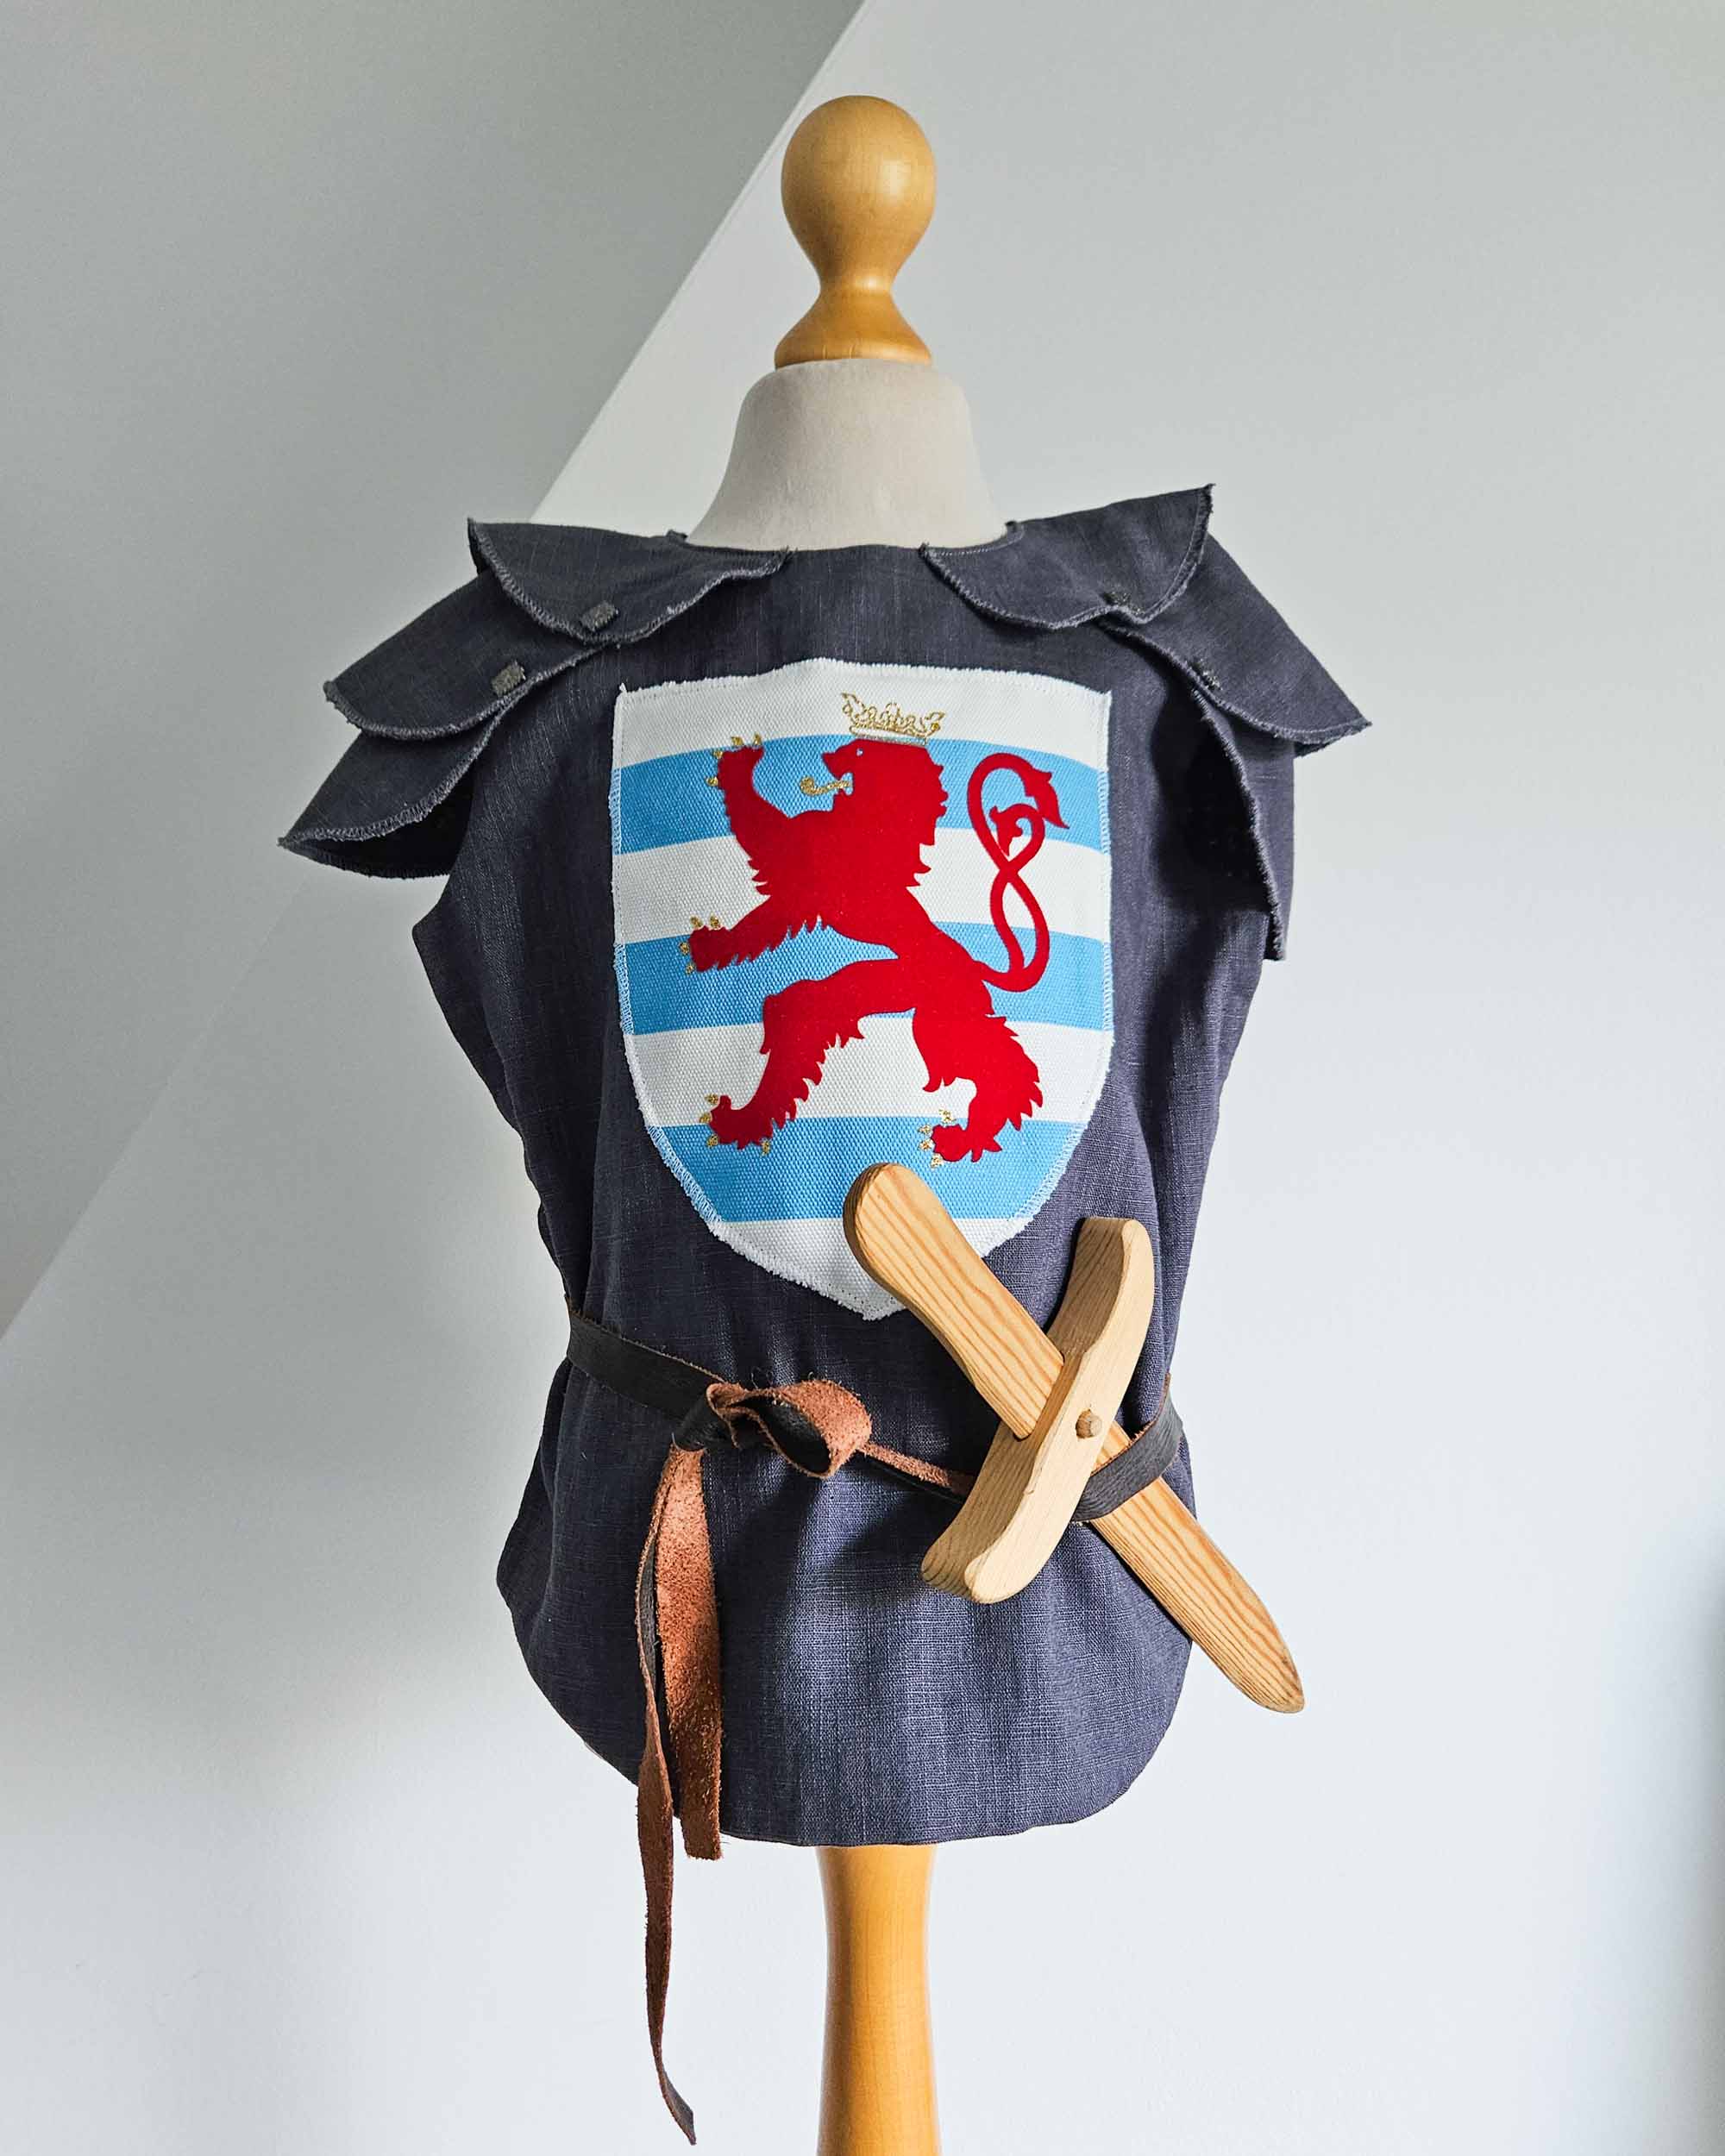 Knight Siegfried tunic with Letzebuerg coat of arms